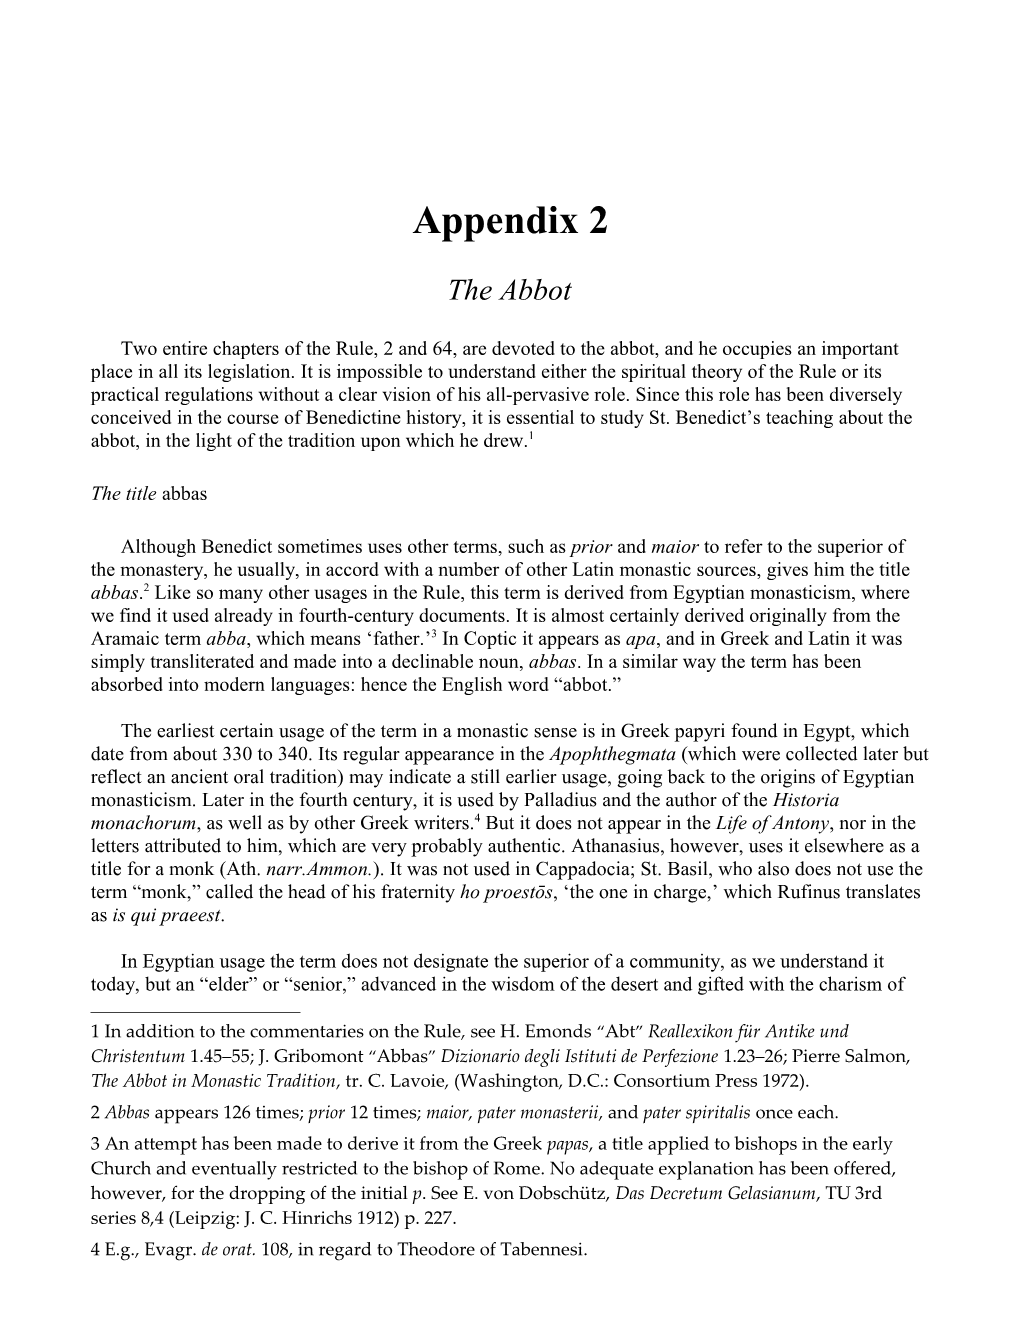 Two Entire Chapters of the Rule, 2 and 64 , Are Devoted to the Abbot, and He Occupies An